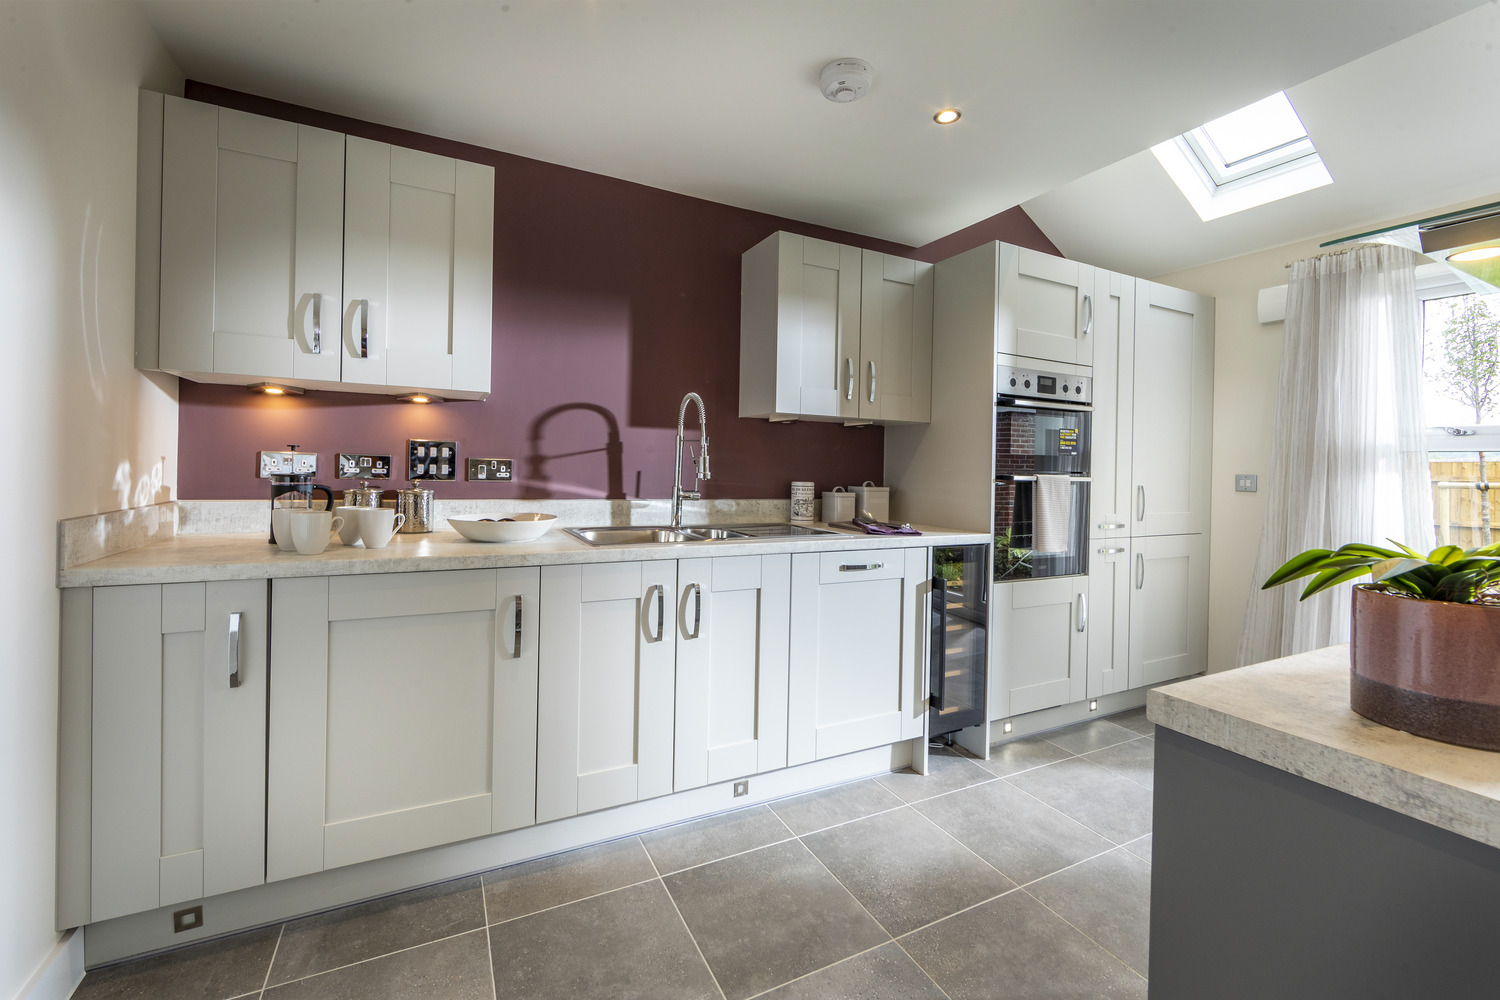 Property 3 of 10. Ombersley Showhome